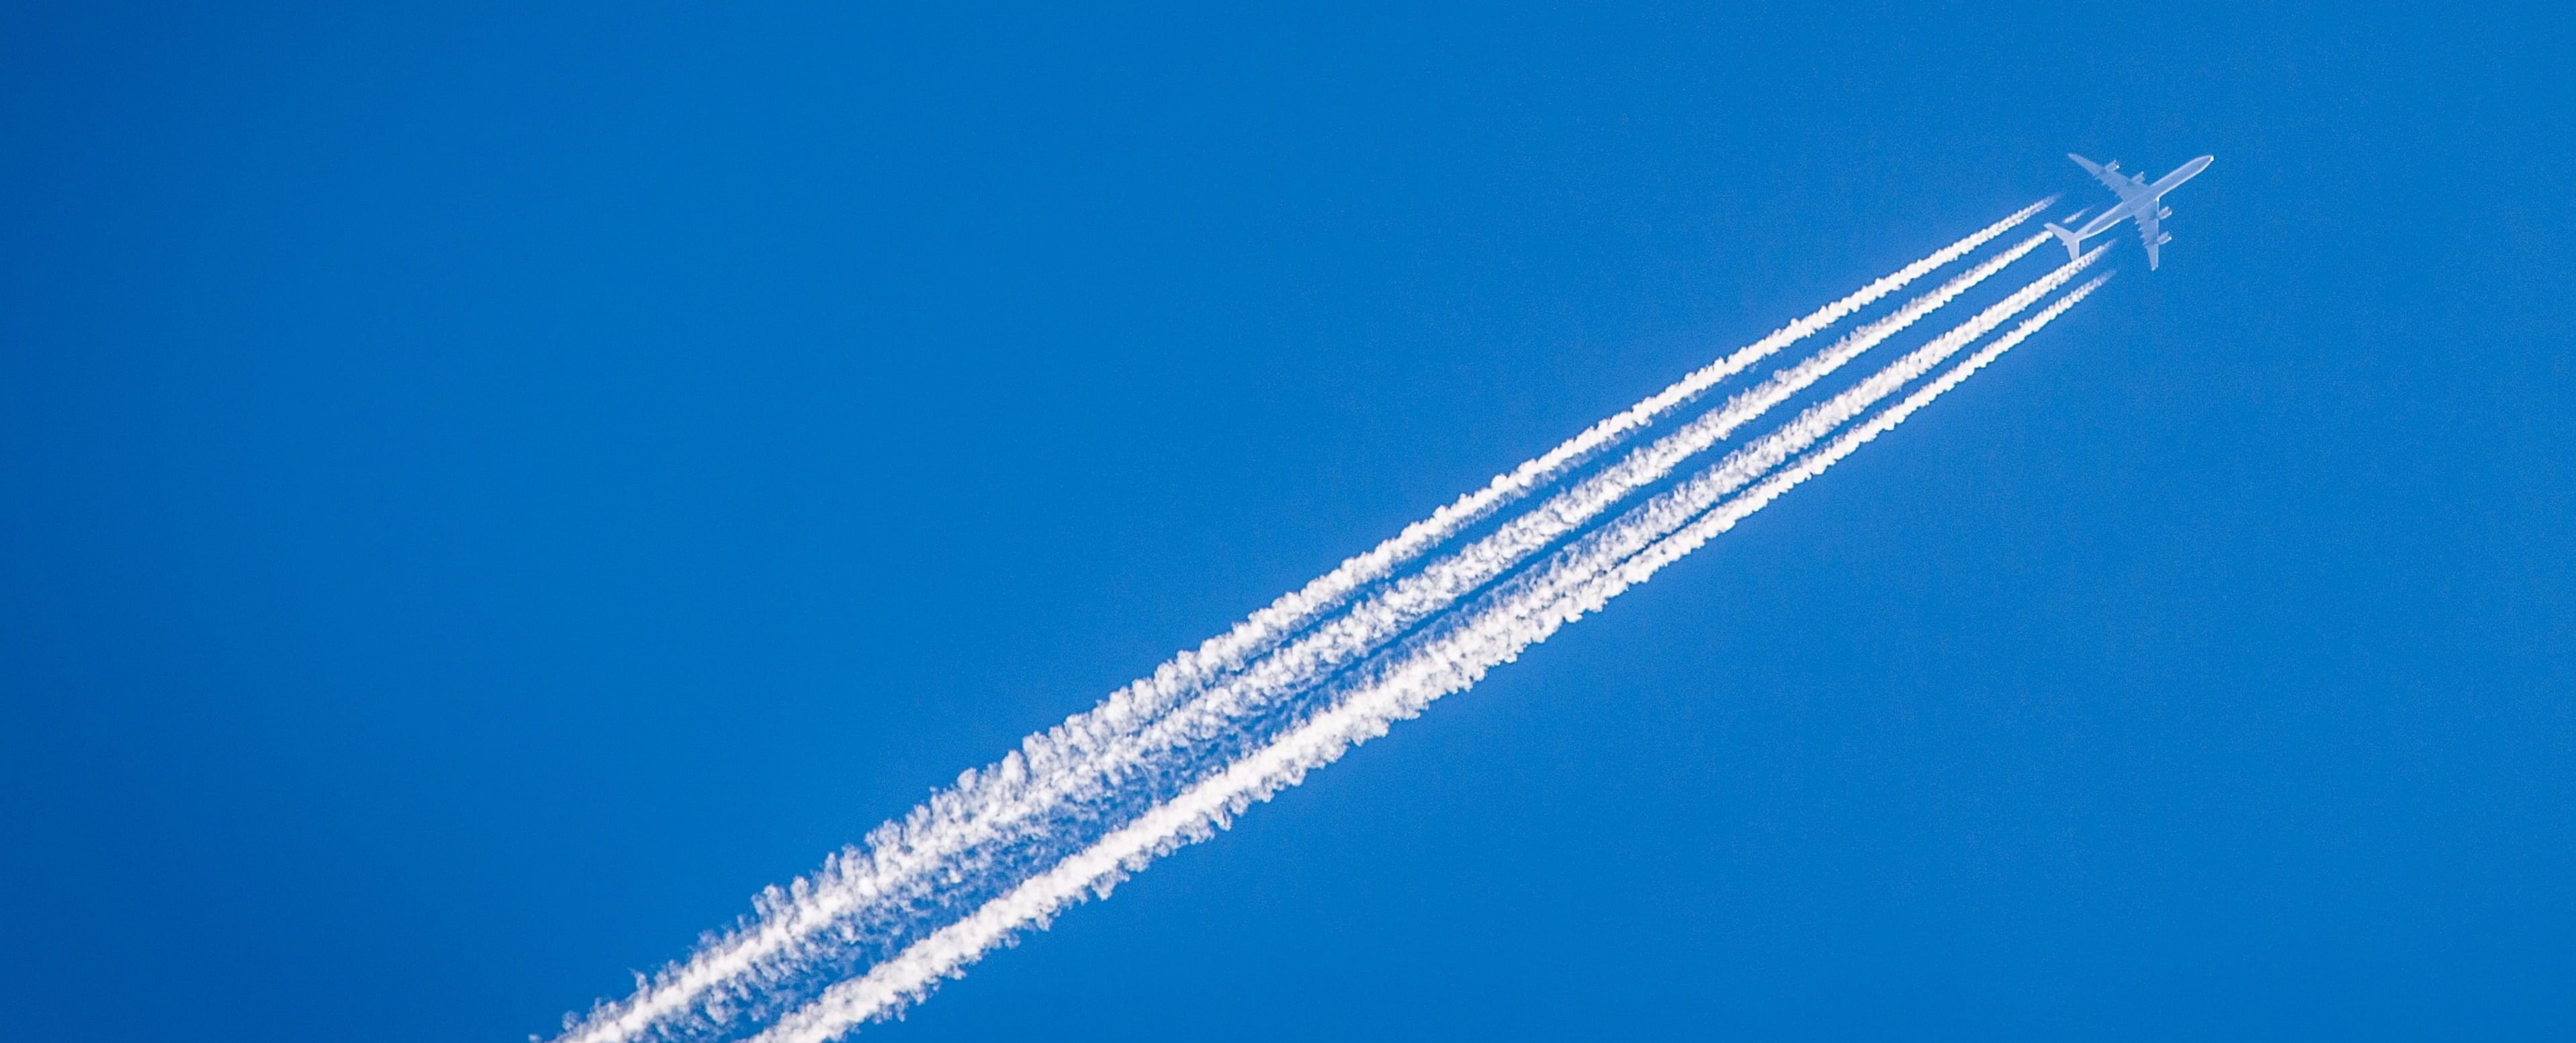 Contrails forming from the exhaust fumes of the aircraft